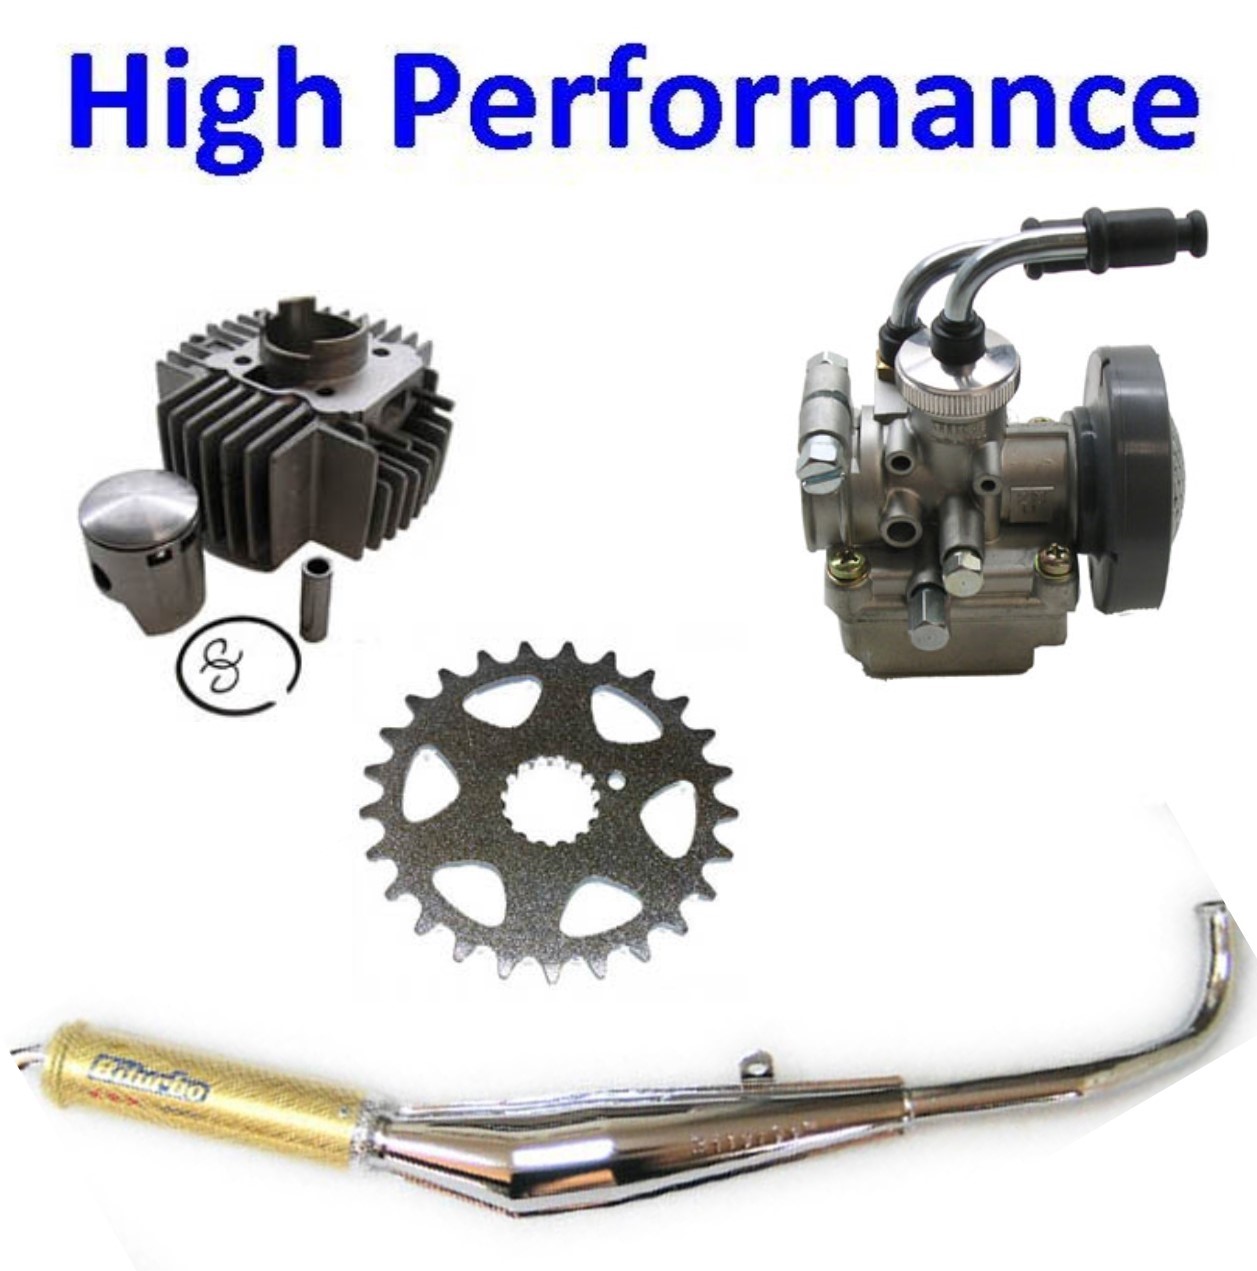 High Performance Parts Tomos A55 Mopeds